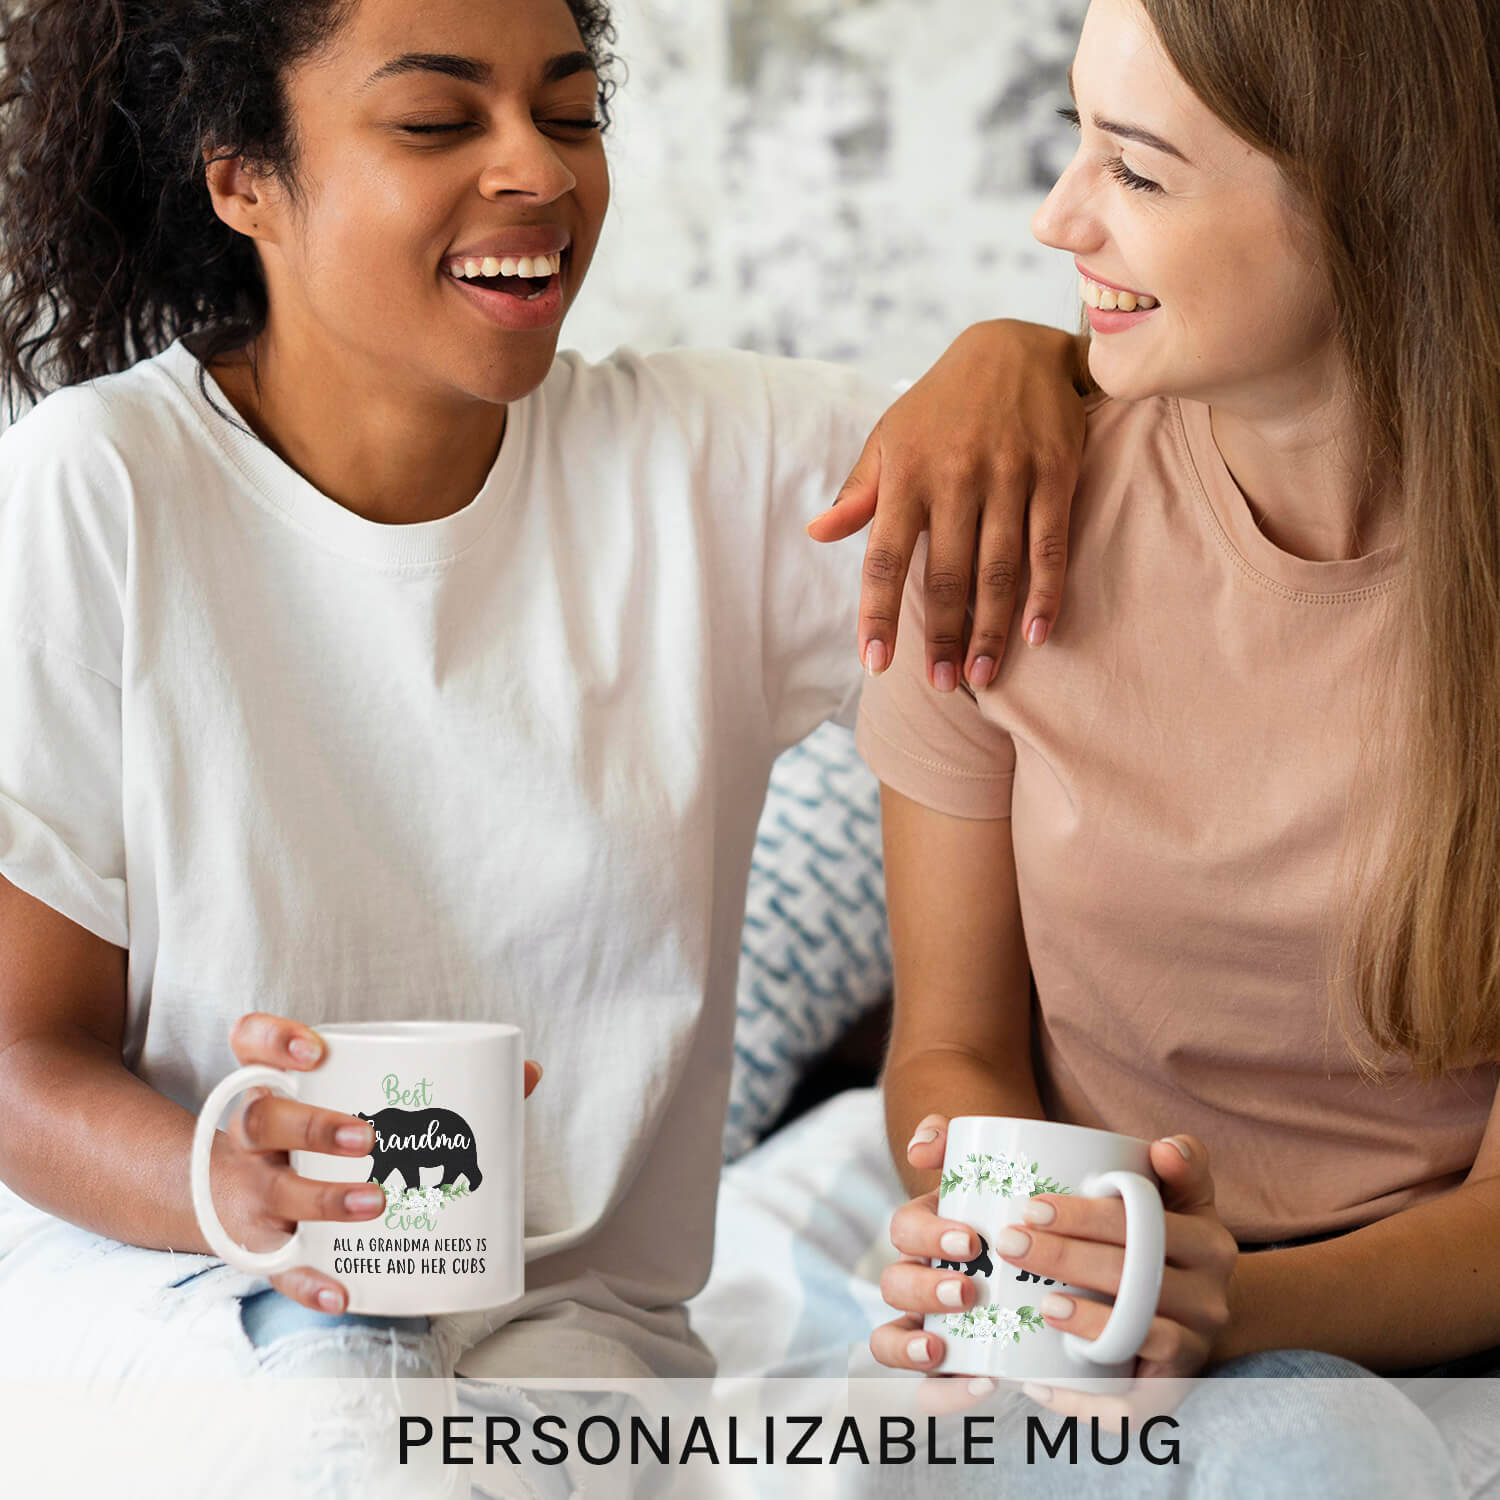 Best grandma ever - Personalized Mother's Day or Birthday gift for Grandma - Custom Mug - MyMindfulGifts